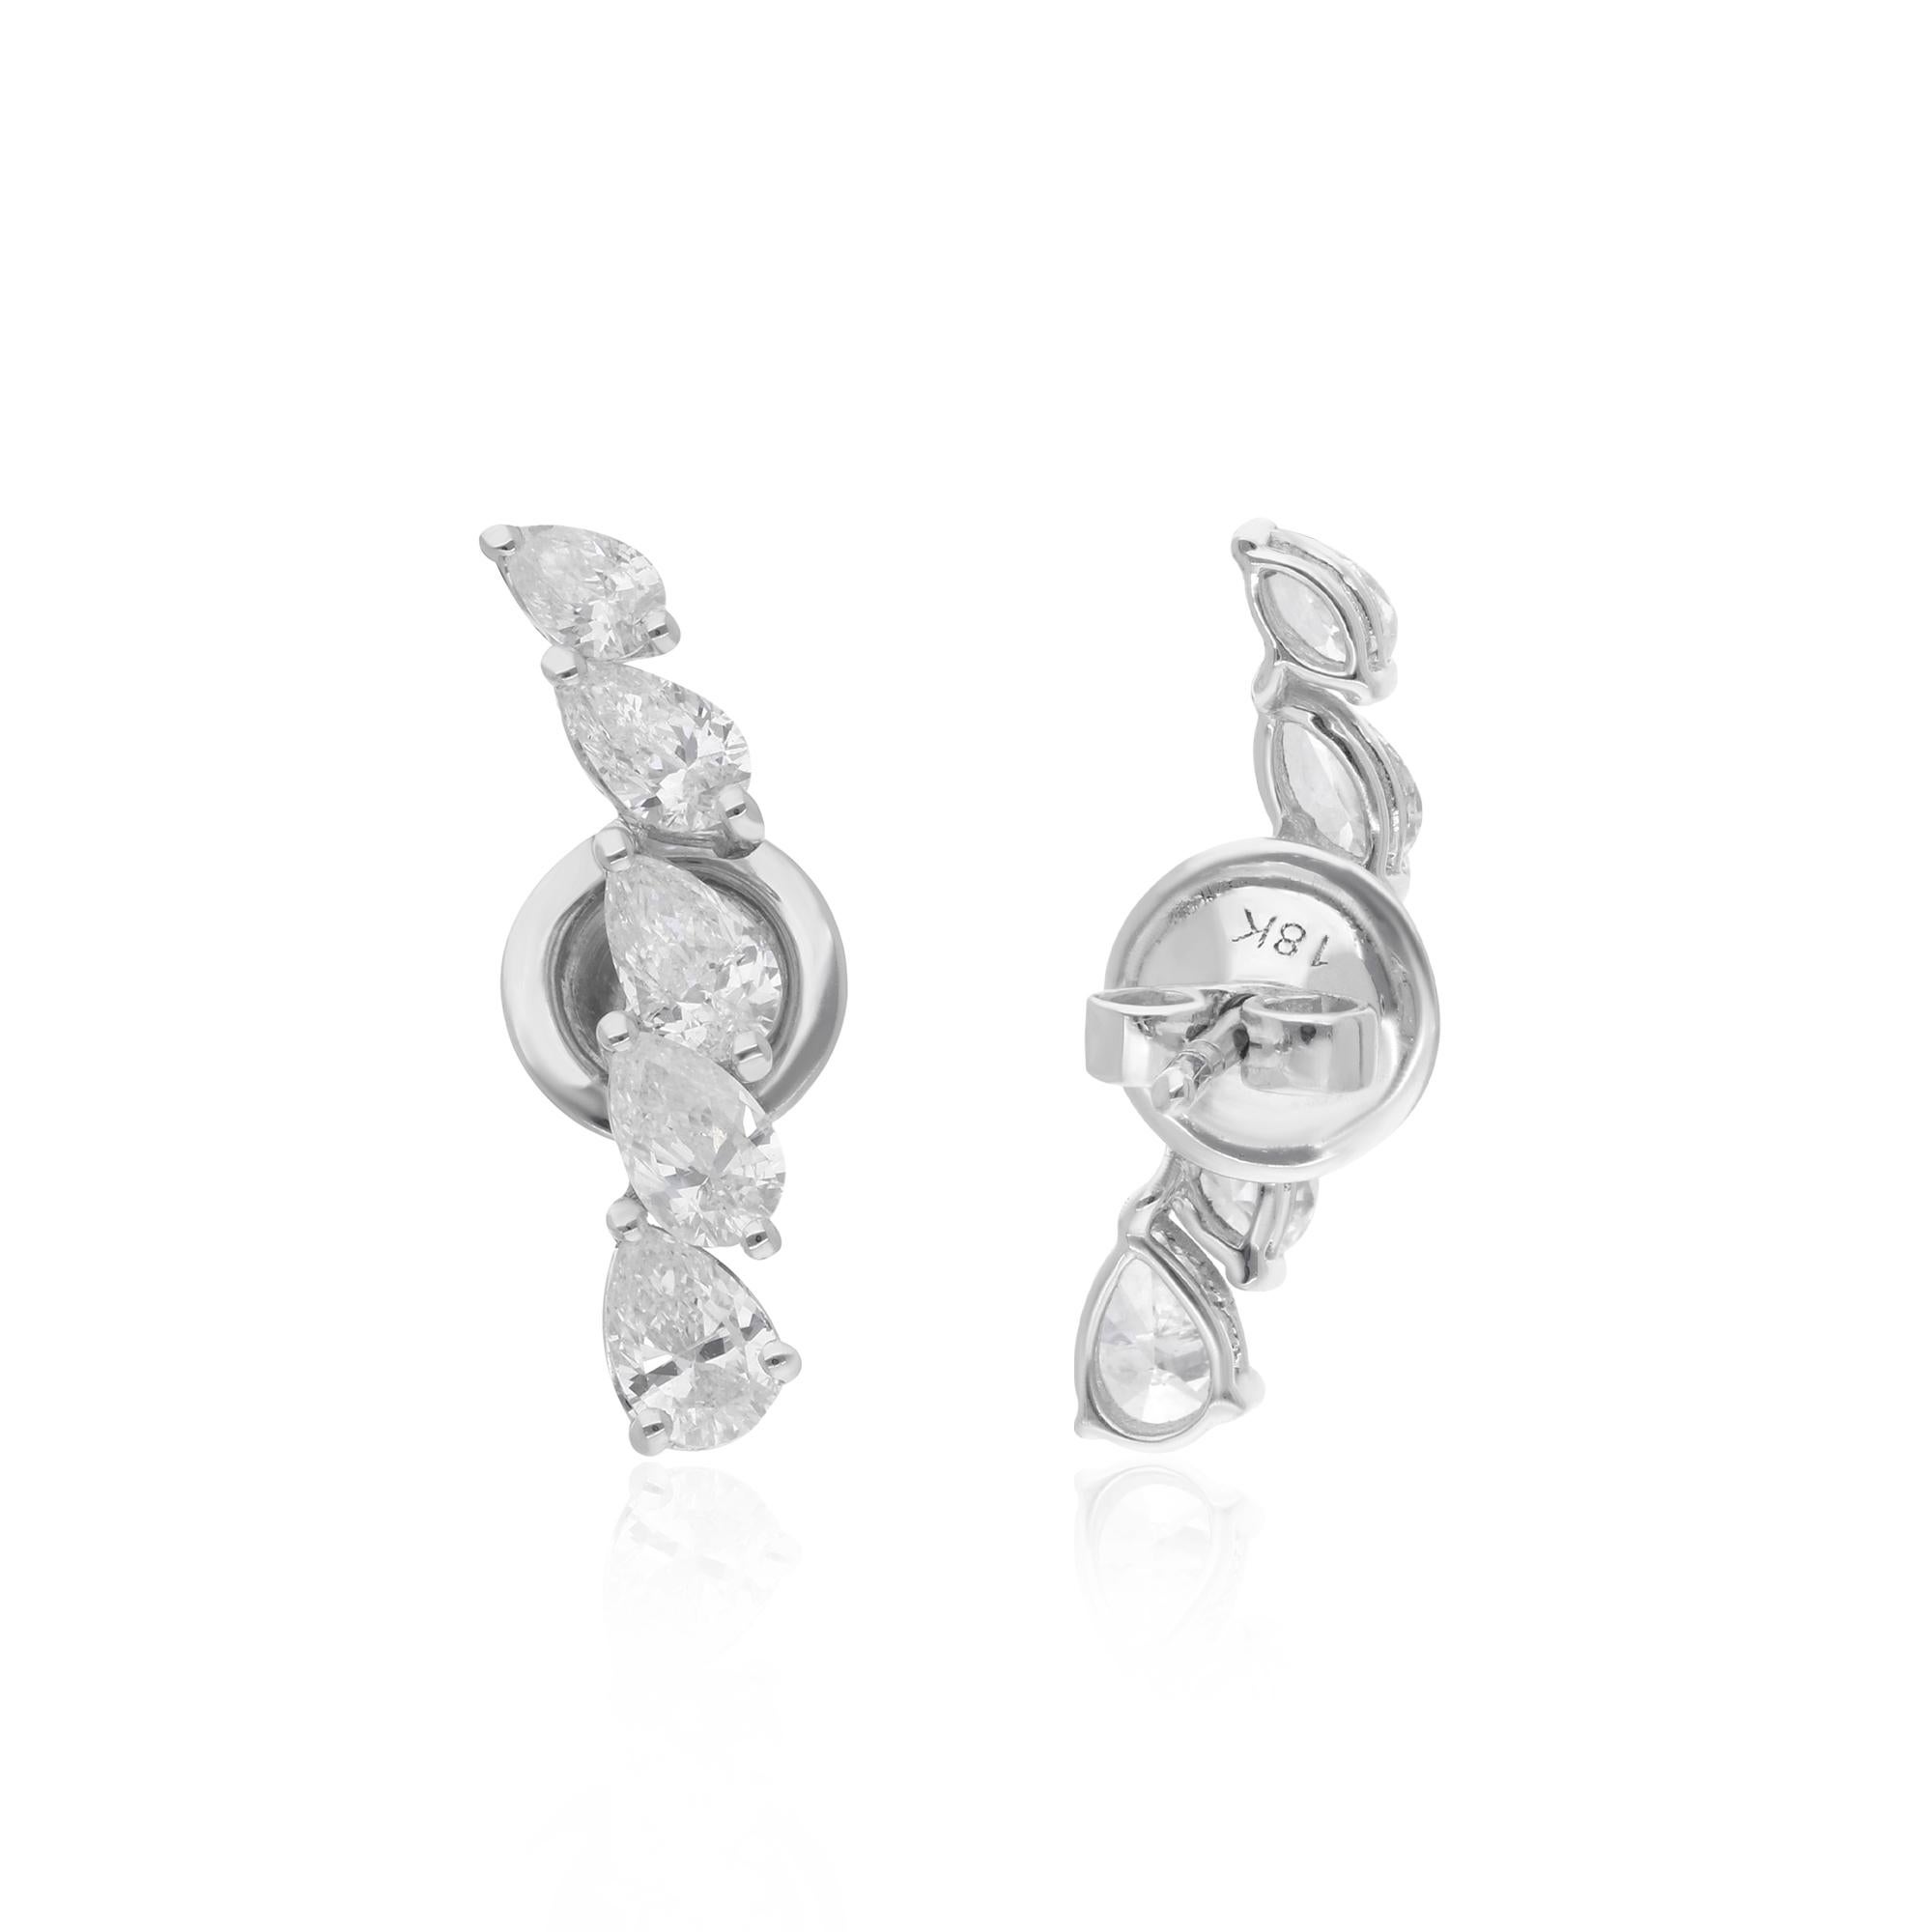 Indulge in timeless elegance with these exquisite Natural Pear Shape Diamond Stud Earrings. Handcrafted with meticulous attention to detail, each earring features a stunning pear-shaped diamond set in lustrous 14 karat white gold.

Item Code :-